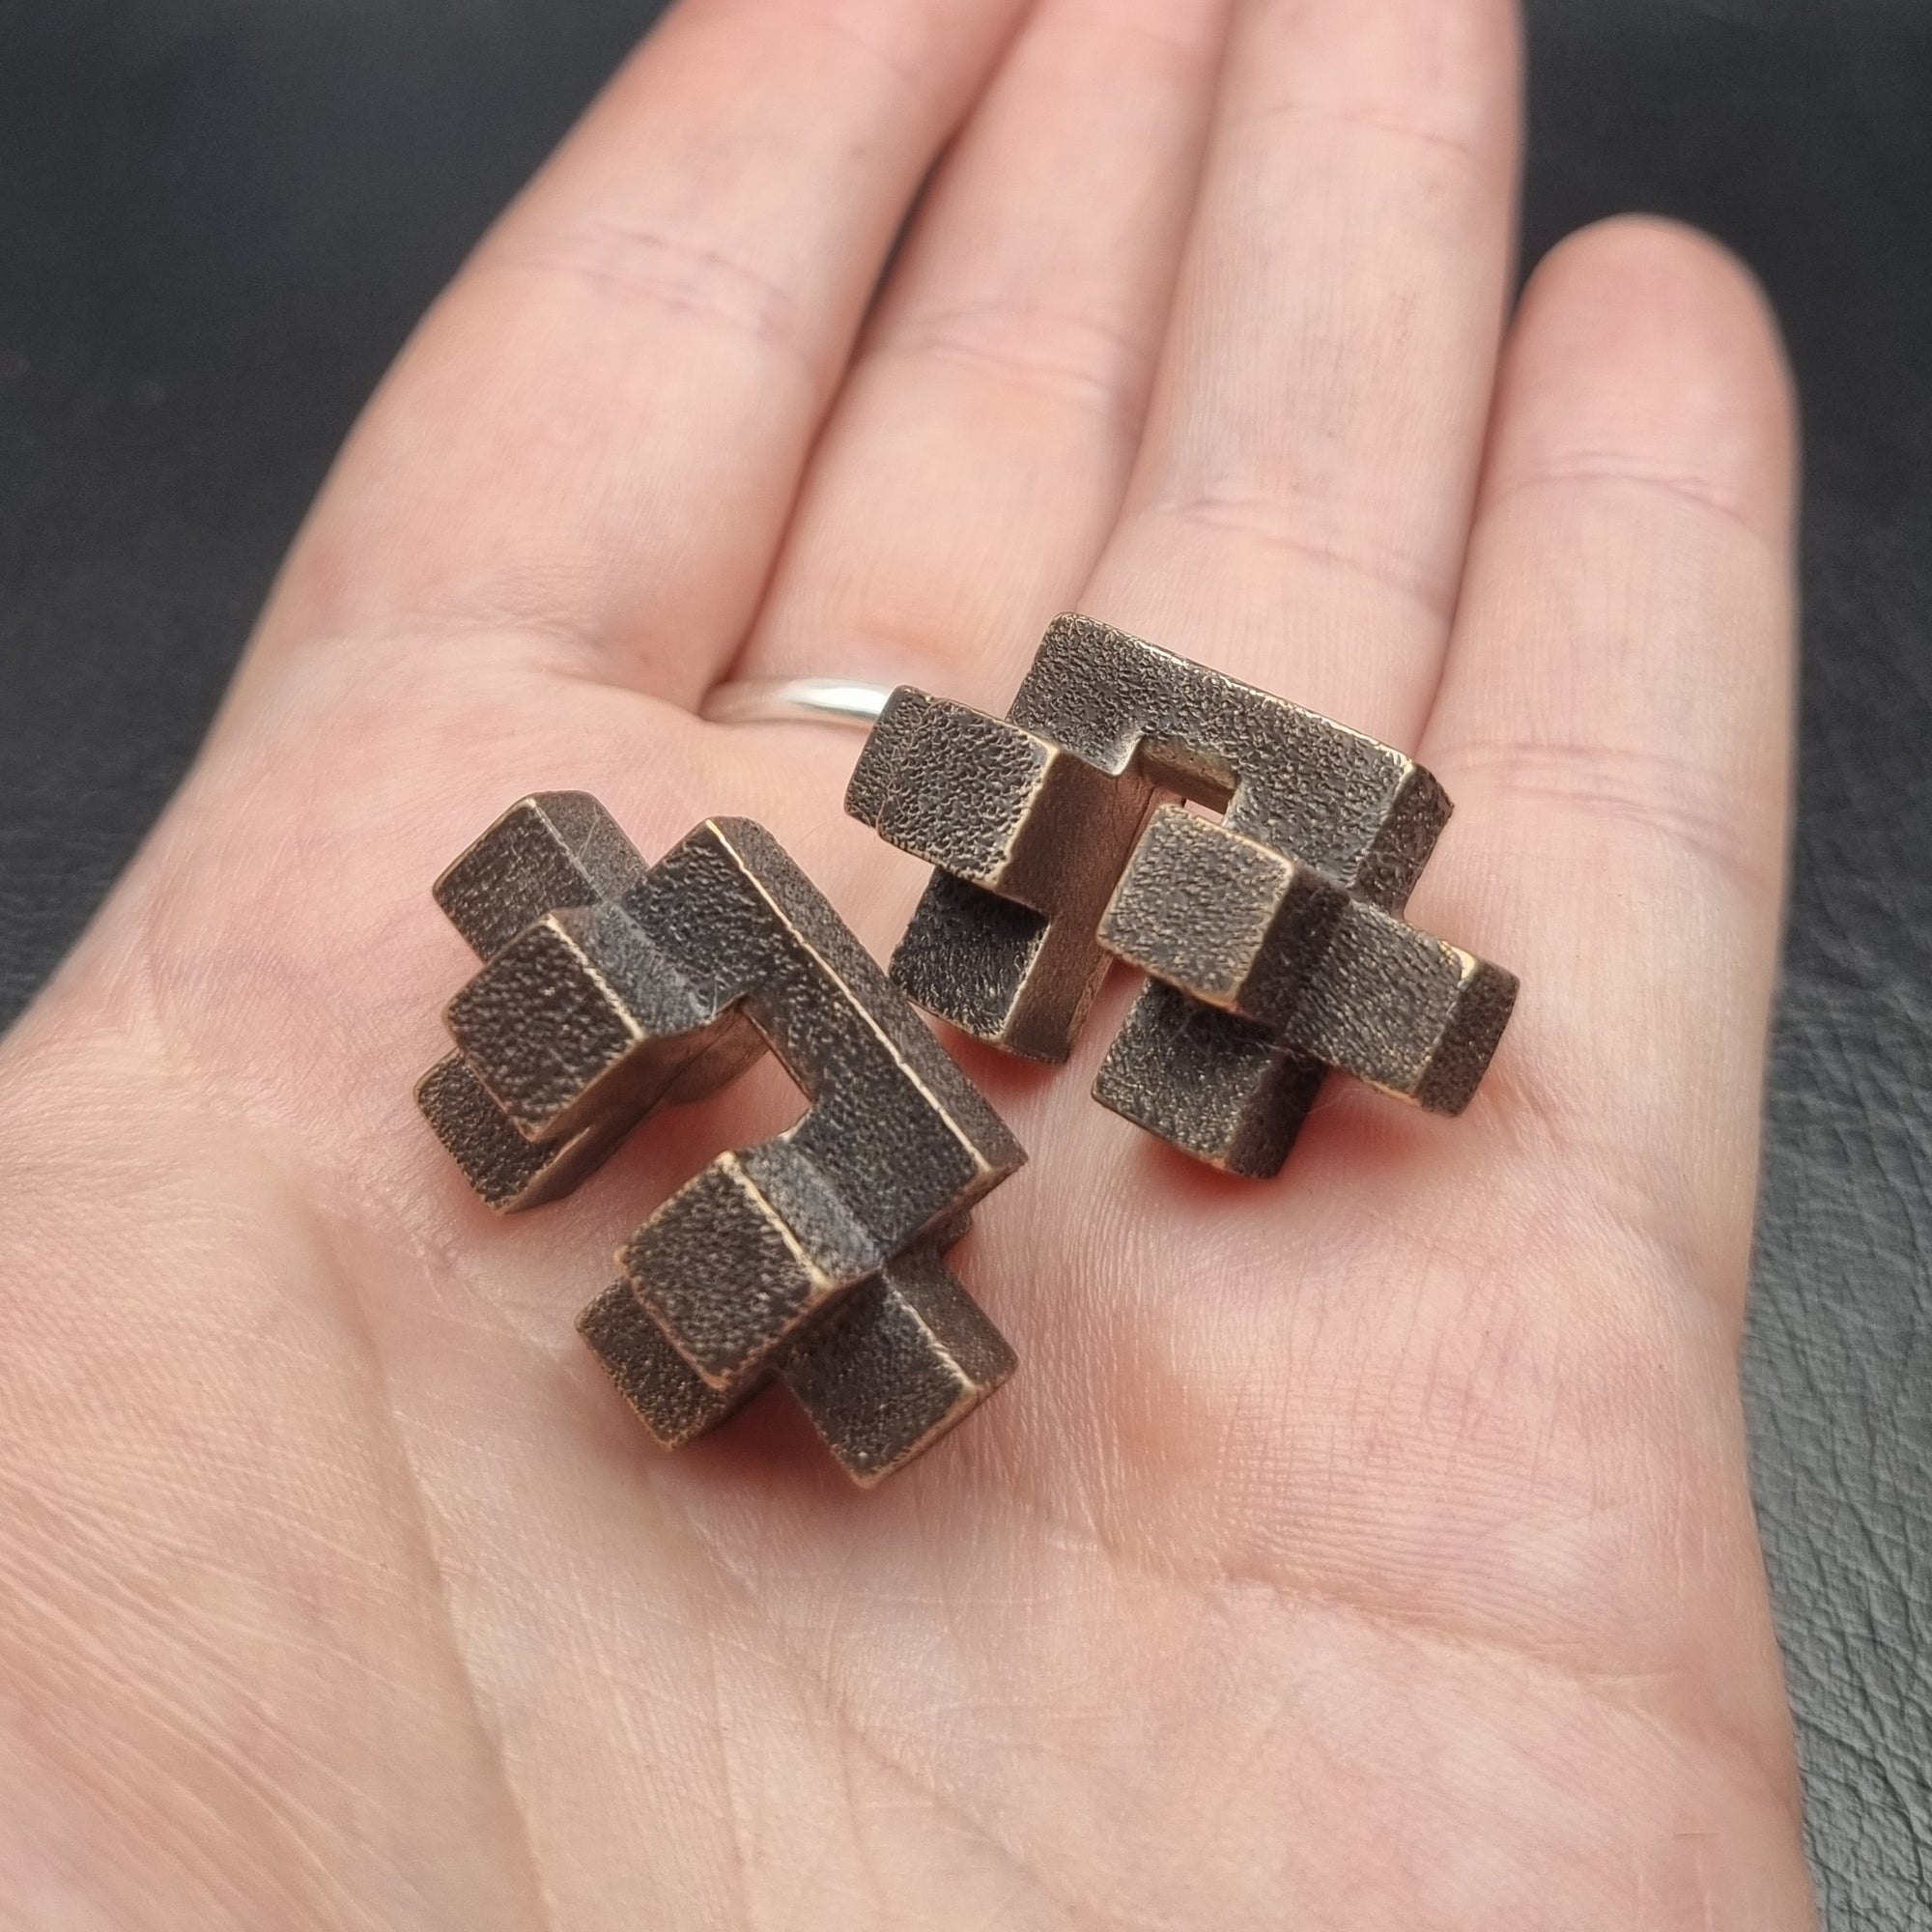 Small Cube Ear Weights - Textured